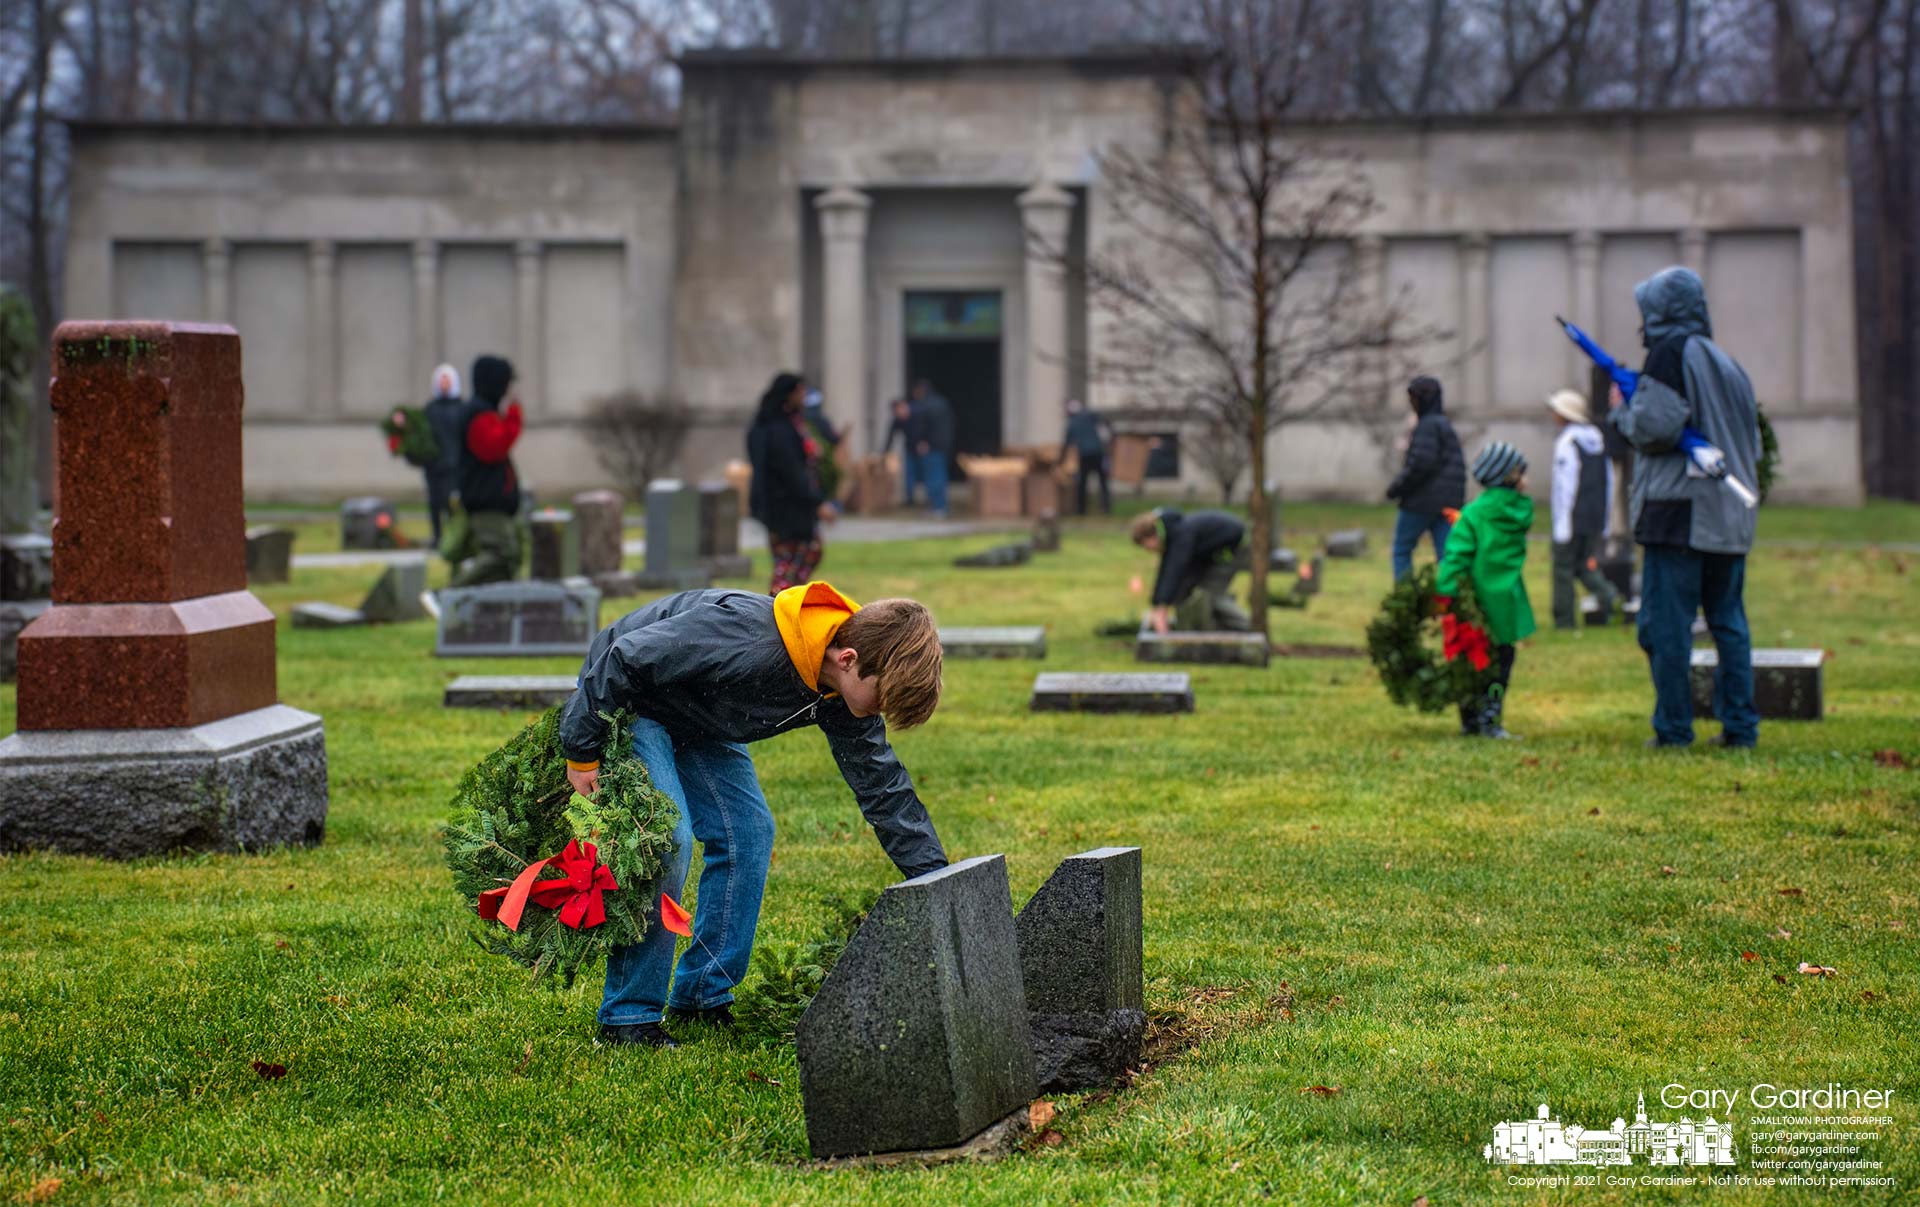 Volunteers lay wreaths at graves in Otterbein Cemetery as part of the national Wreaths Across America program that honors military veterans. My Final Photo for Dec. 18, 2021.